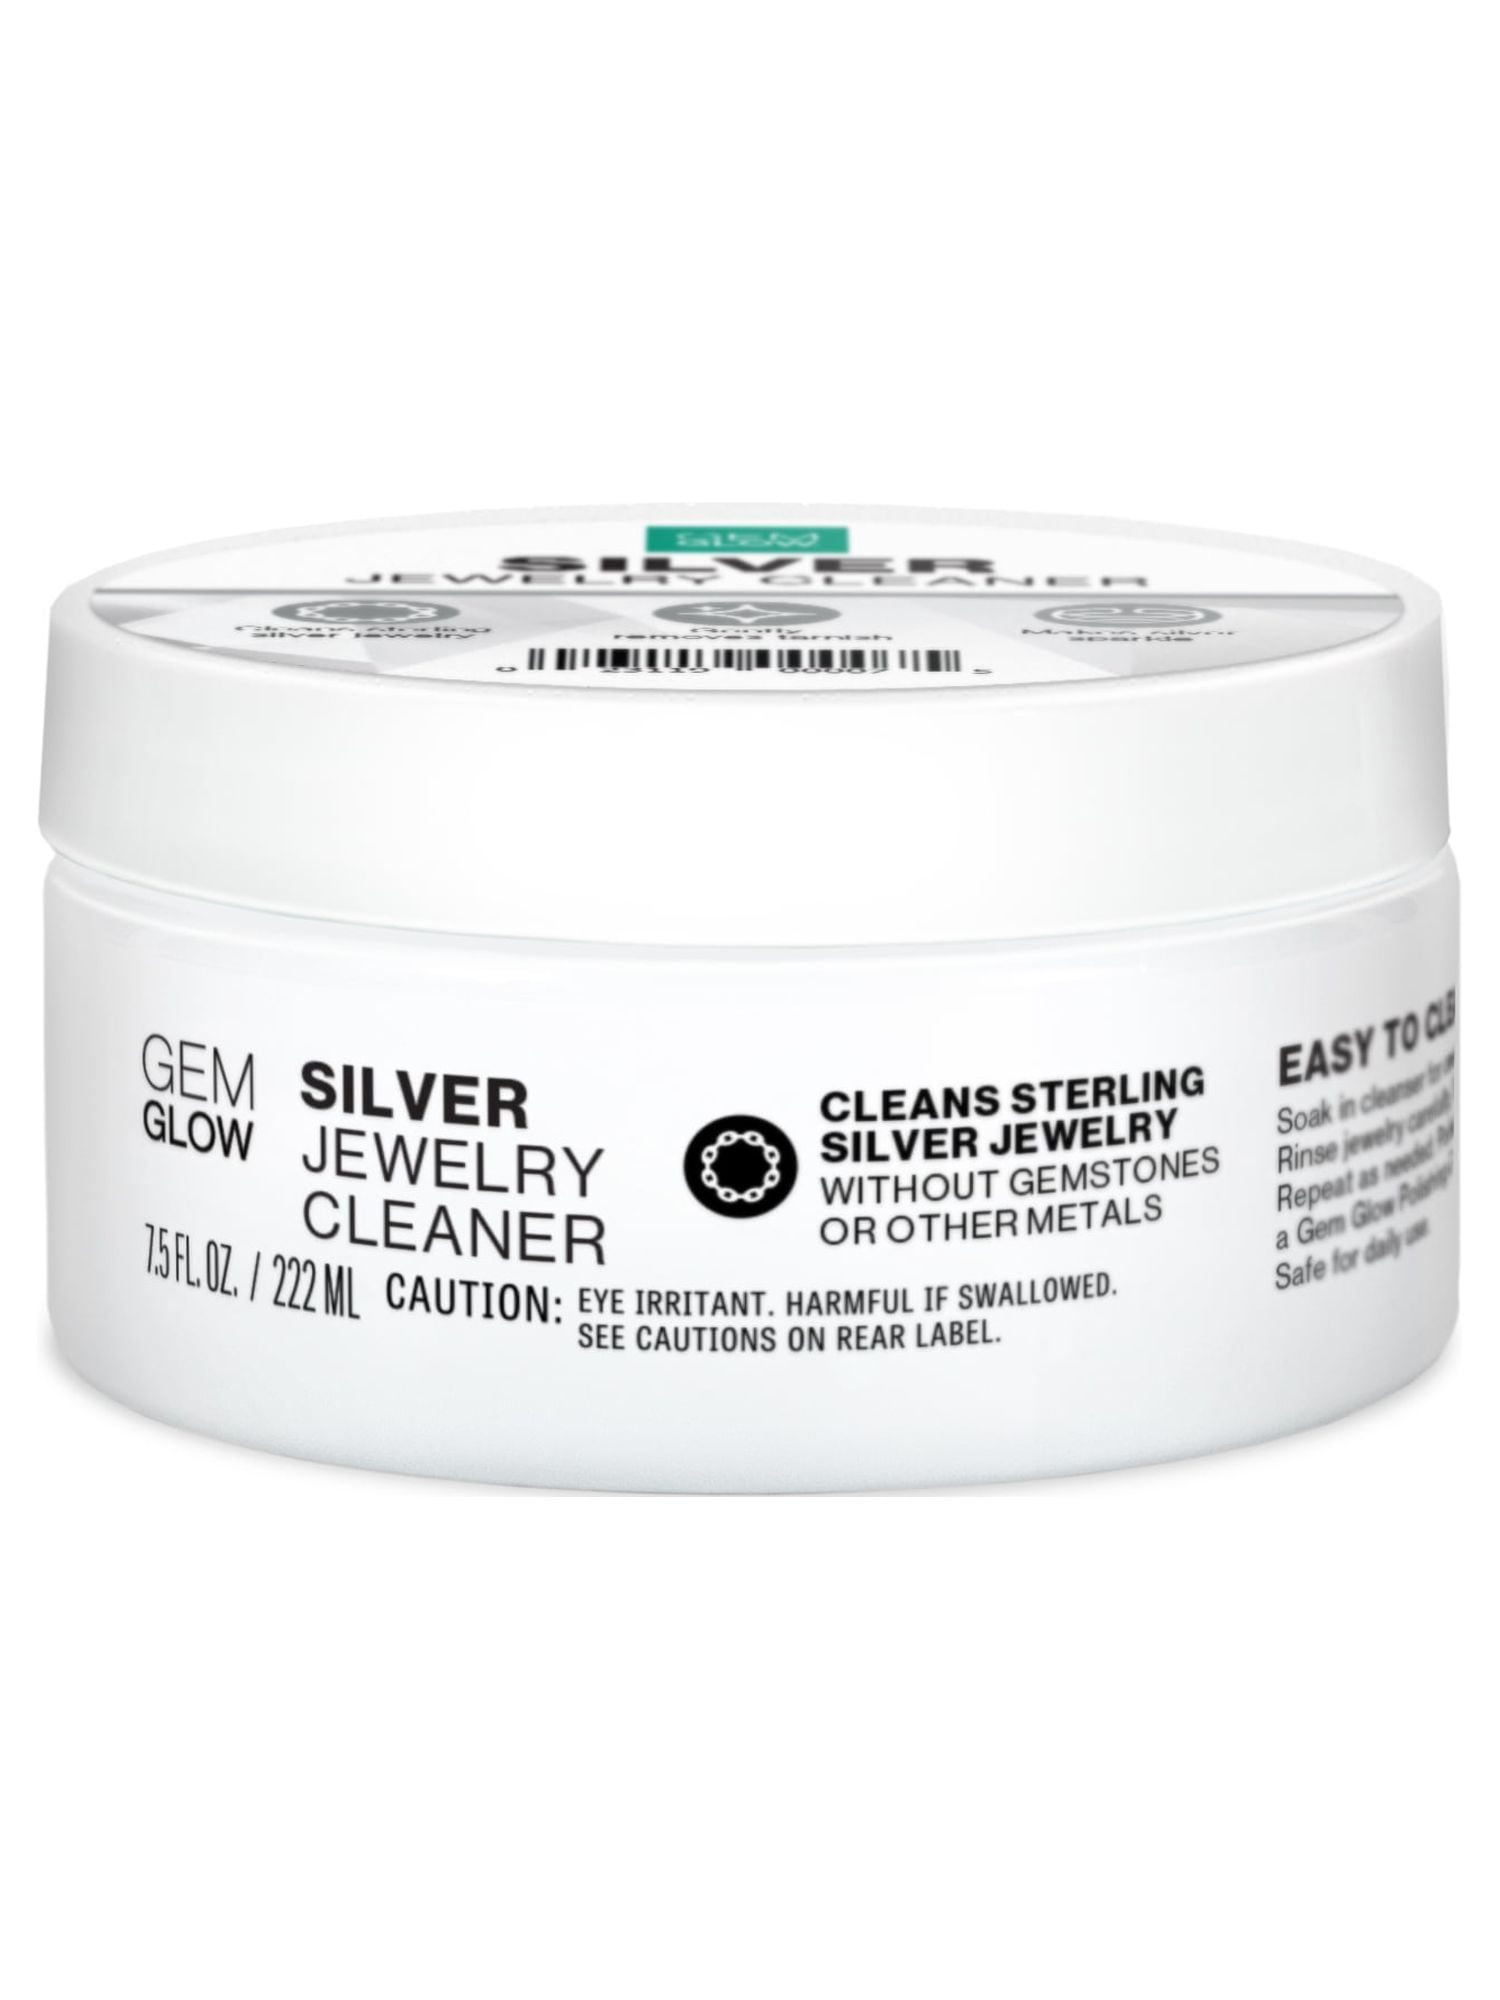 Sterling Silver Jewelry Cleaner - KD Fine Jewelers